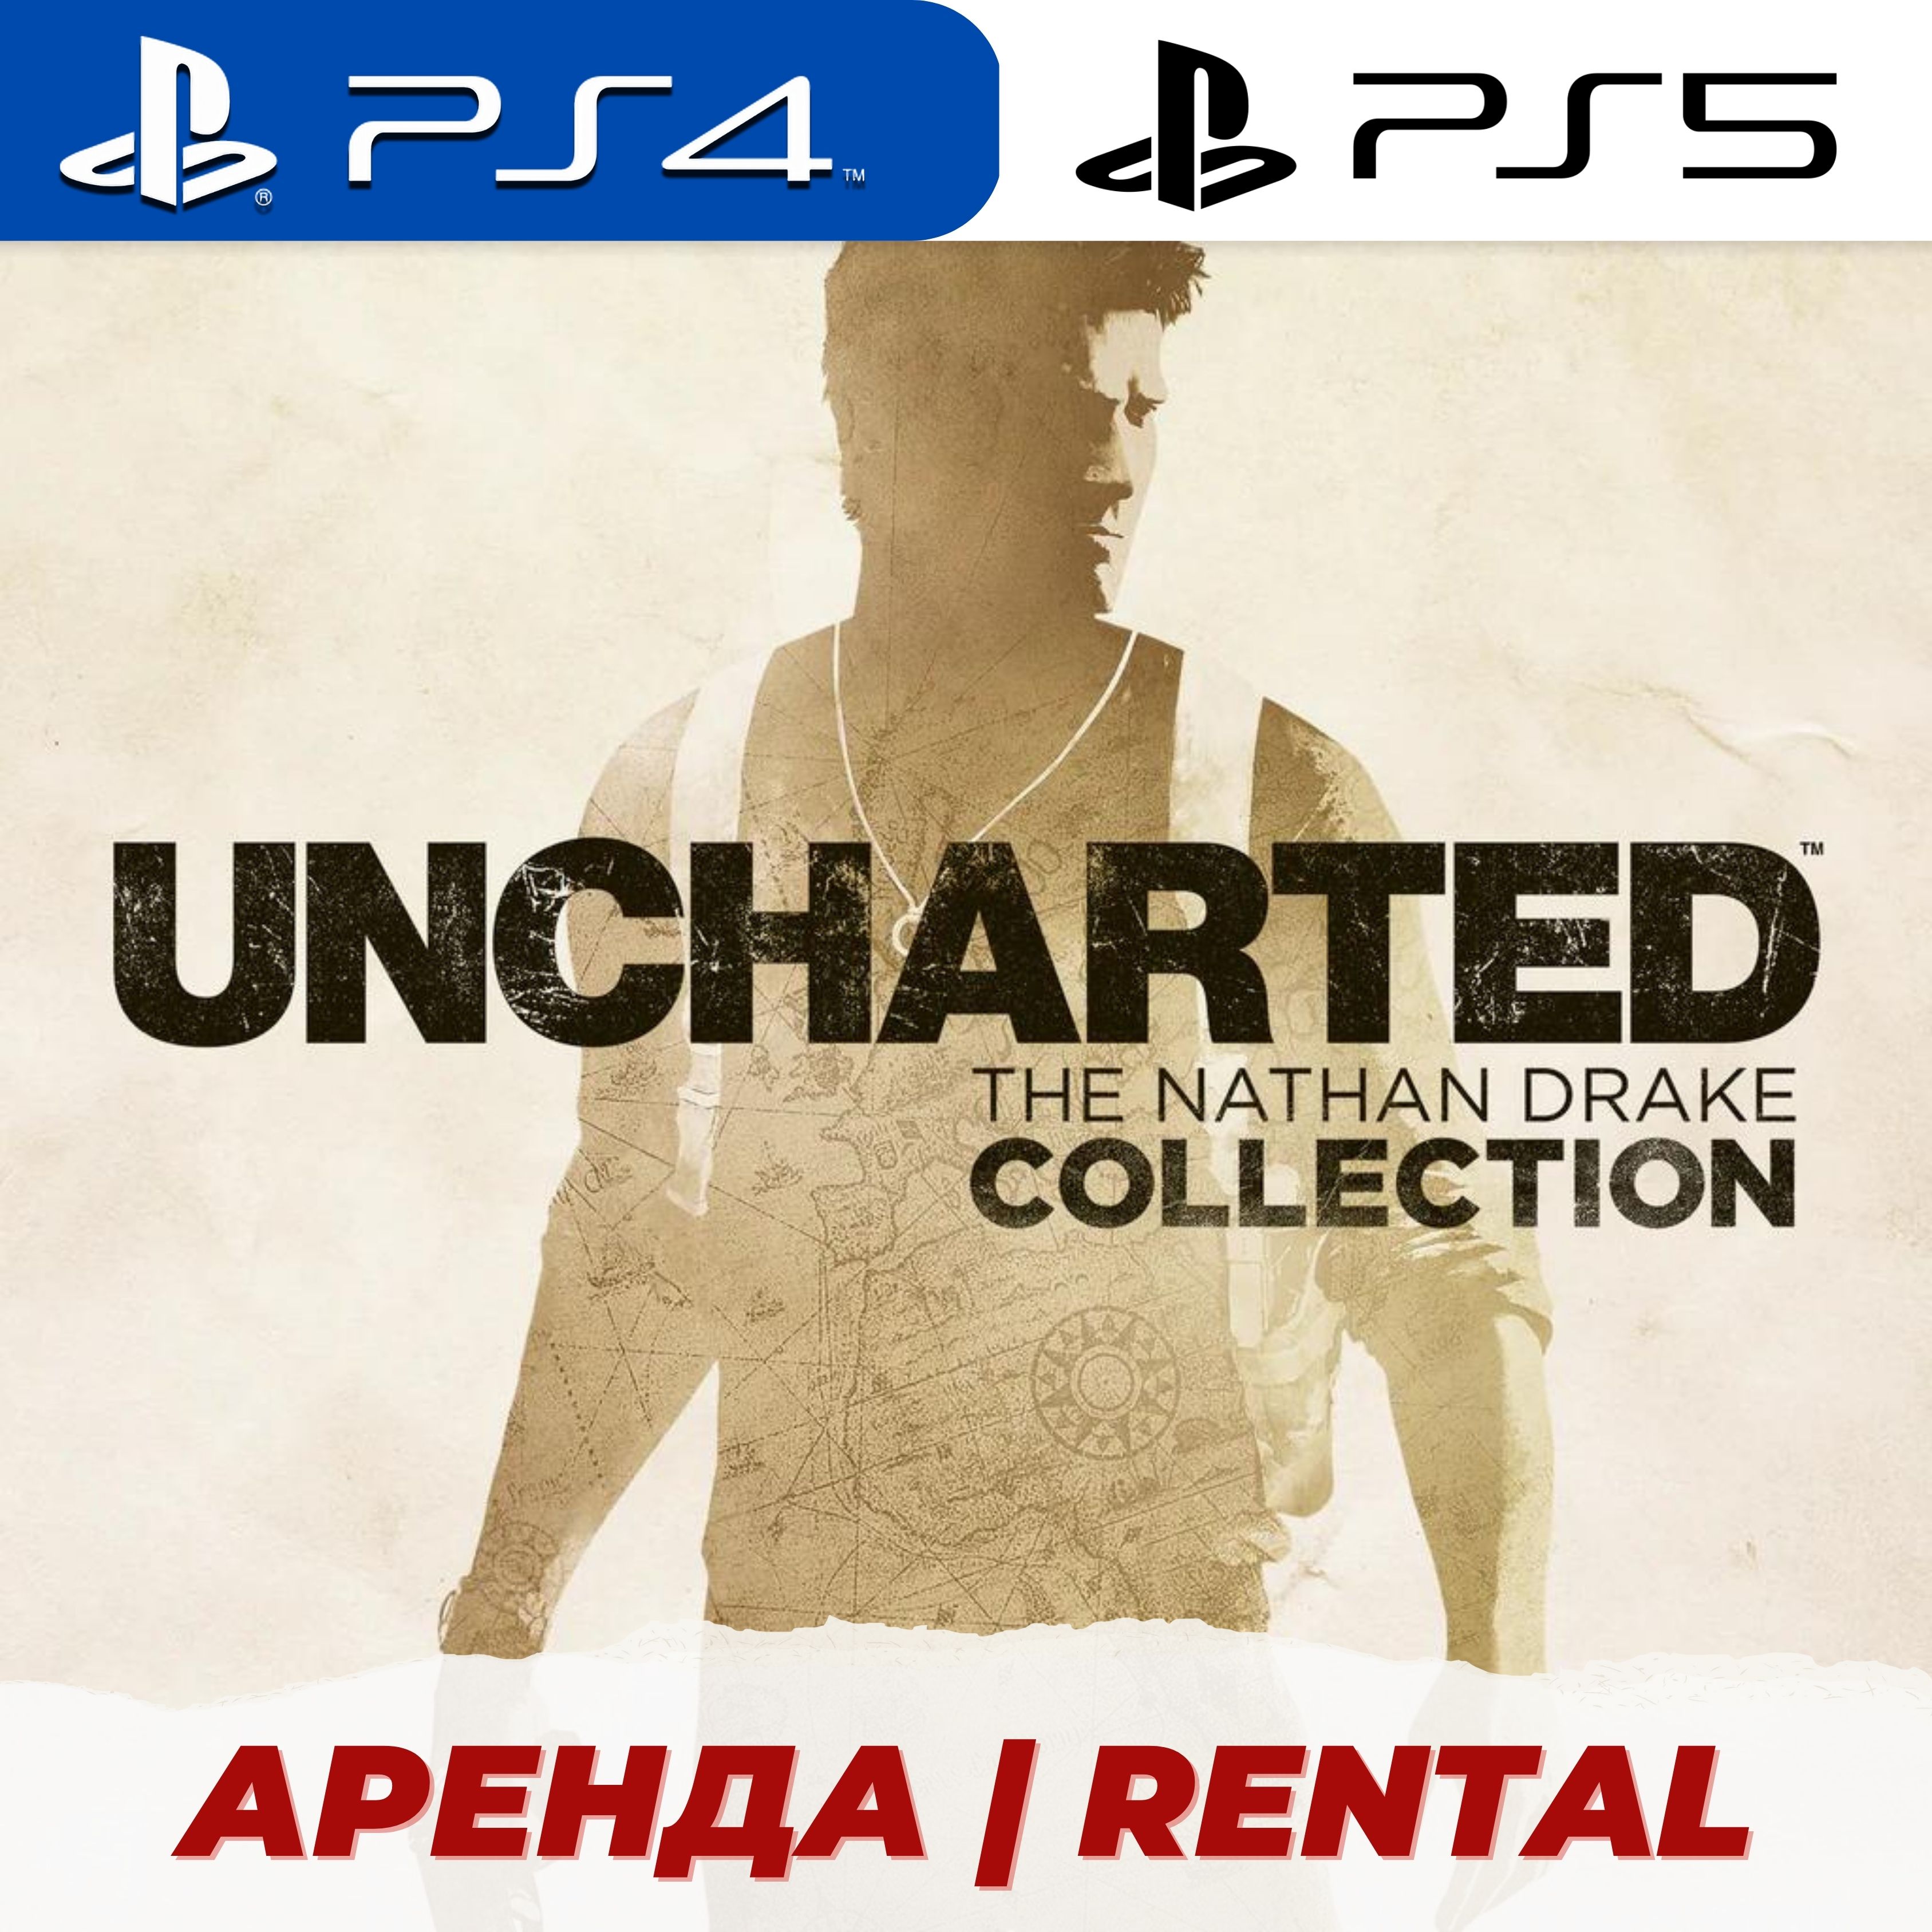 Uncharted collection купить. Uncharted collection ps4. Uncharted™: the Nathan Drake collection. Uncharted collection ps4 Cover. Uncharted коллекция ps4.